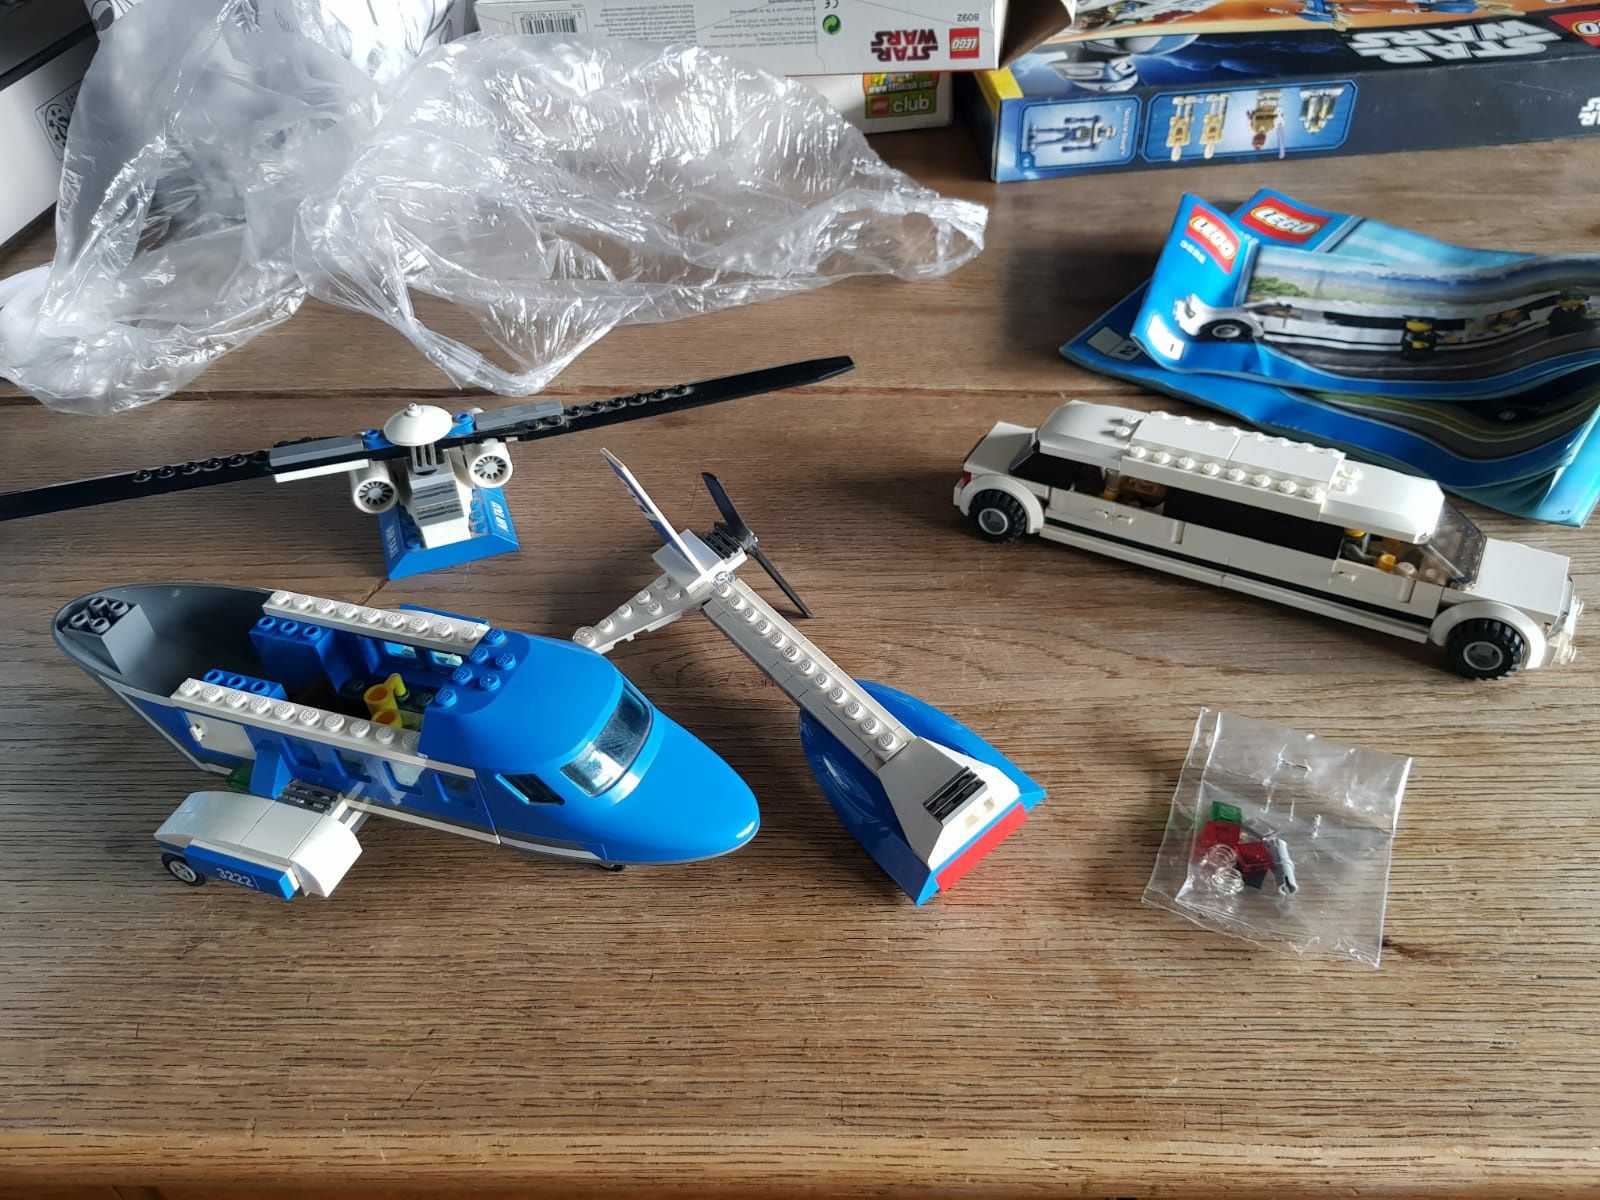 Lego City Helicopter and Limousine 3222